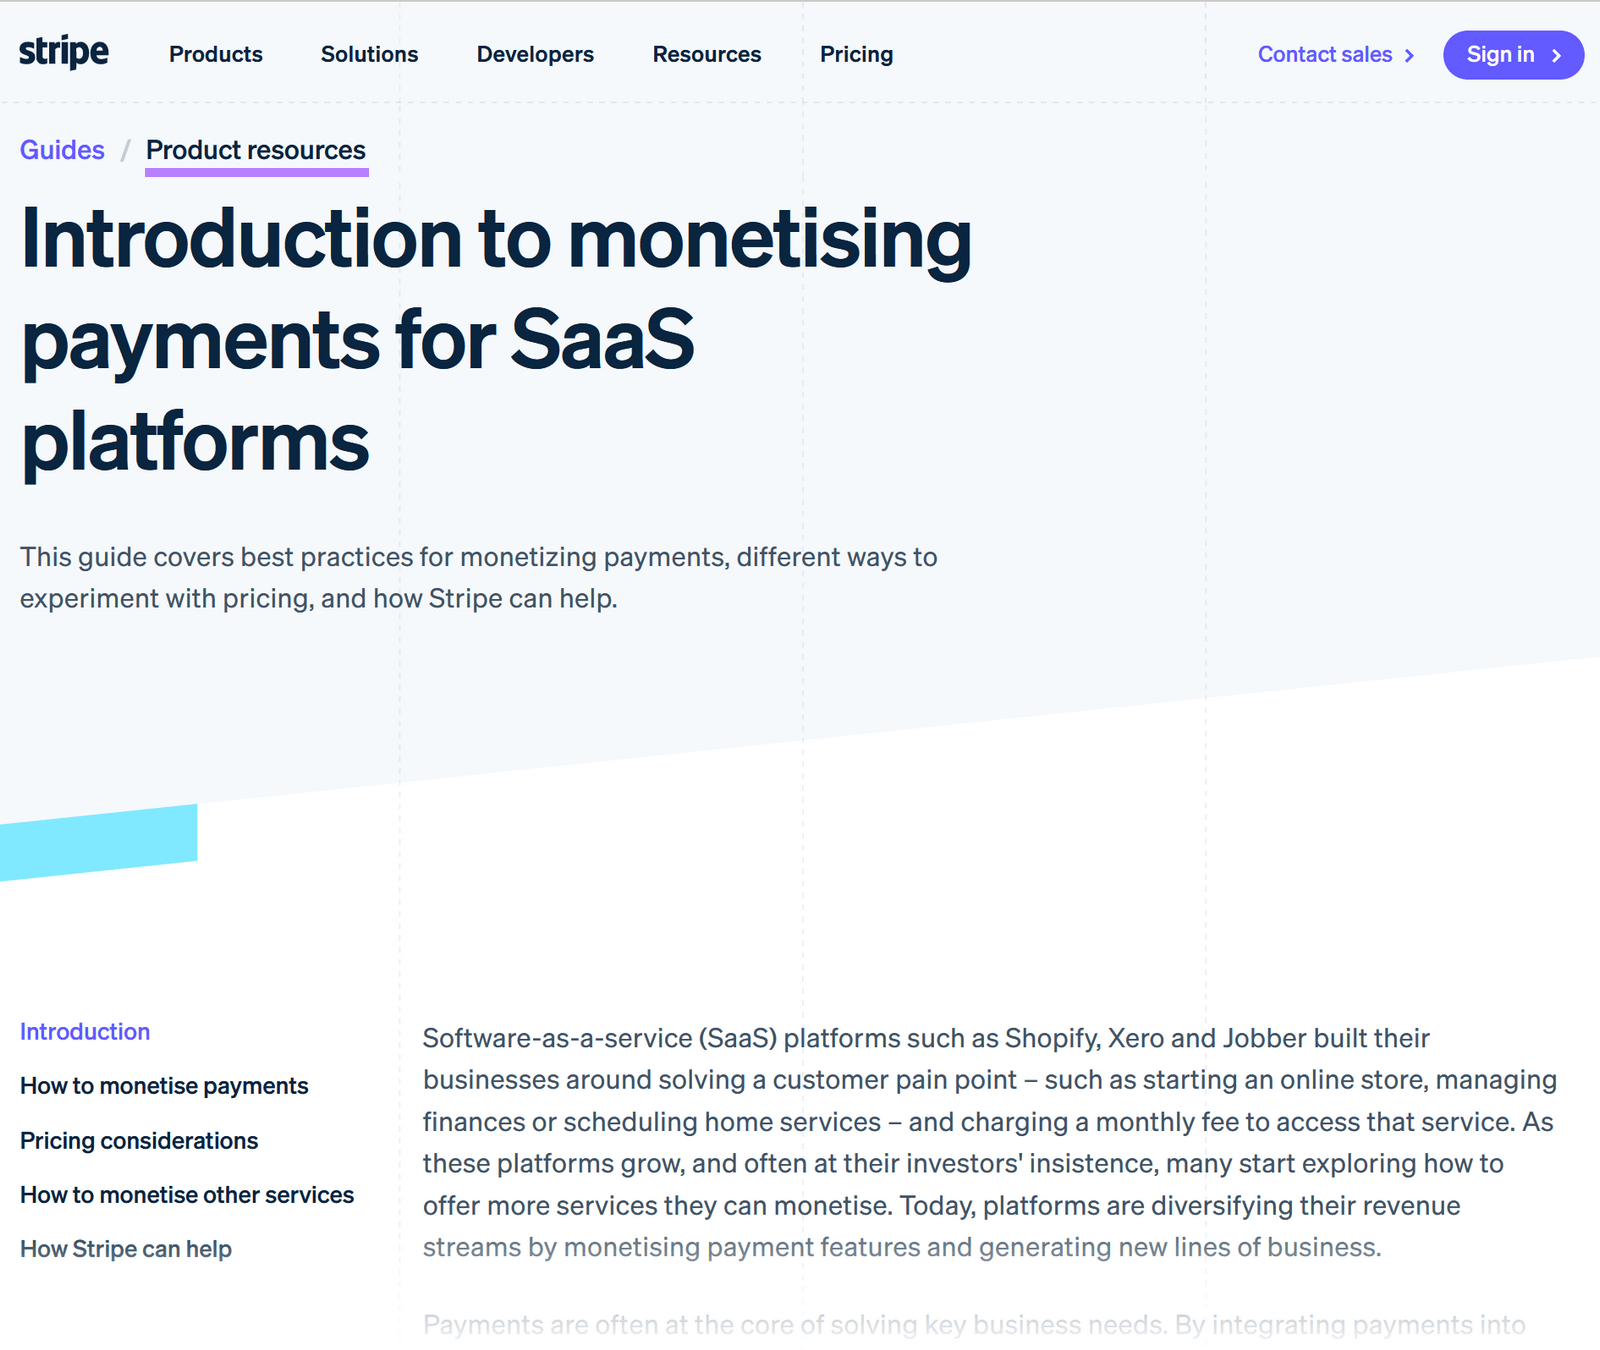 Stripe's article called introduction to monetizing payments for SaaS platforms.